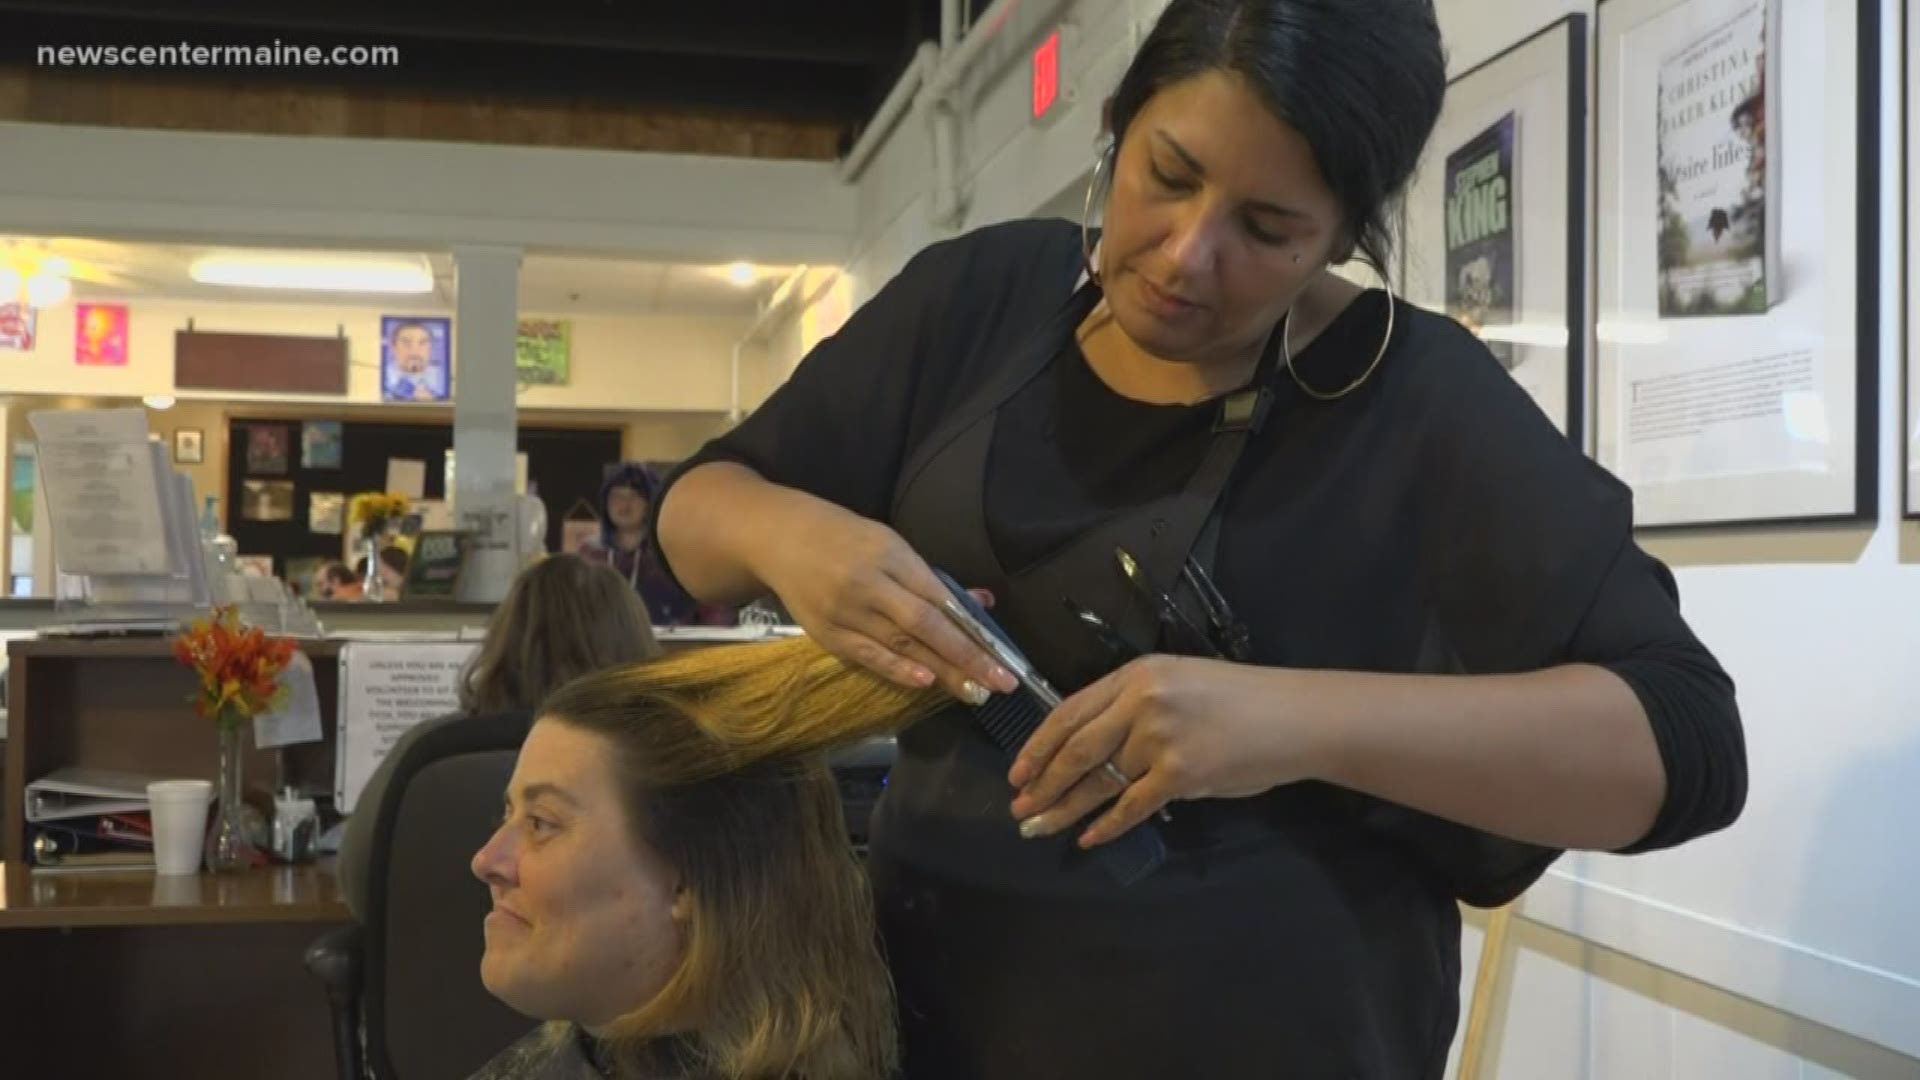 For those struggling on the streets getting a haircut can become less of a priority but at The Together Place in Bangor is bringing that essential service for free.